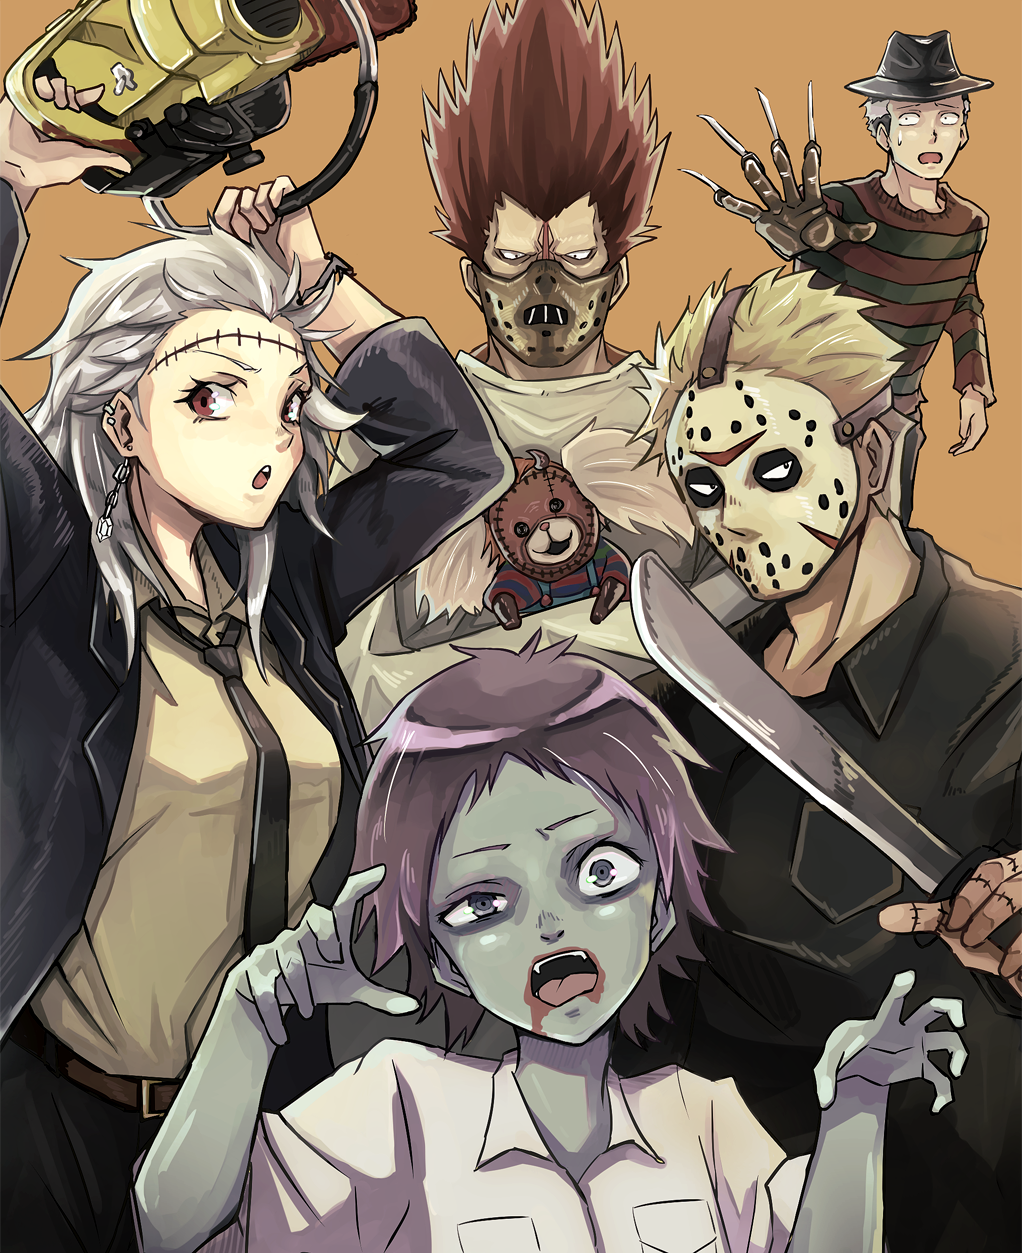 2girls 3boys a_nightmare_on_elm_street animal belt black_shirt blonde_hair blood blood_on_face chainsaw child's_play chucky chucky_(cosplay) collared_shirt cosplay dorohedoro ear_piercing earrings ebisu_(dorohedoro) en_(dorohedoro) fedora freddy_krueger freddy_krueger_(cosplay) friday_the_13th fujita_(dorohedoro) hannibal_lecter hannibal_lecter_(cosplay) hat highres hockey_mask holding holding_animal holding_chainsaw holding_weapon jason_voorhees jason_voorhees_(cosplay) jewelry kikurage_(dorohedoro) leatherface leatherface_(cosplay) machete mask multicolored_hair multiple_boys multiple_girls necktie noi_(dorohedoro) open_mouth orange_background osakanaotoko overalls piercing purple_hair red_eyes red_hair shin_(dorohedoro) shirt simple_background straitjacket the_silence_of_the_lambs the_texas_chainsaw_massacre two-tone_hair weapon white_shirt